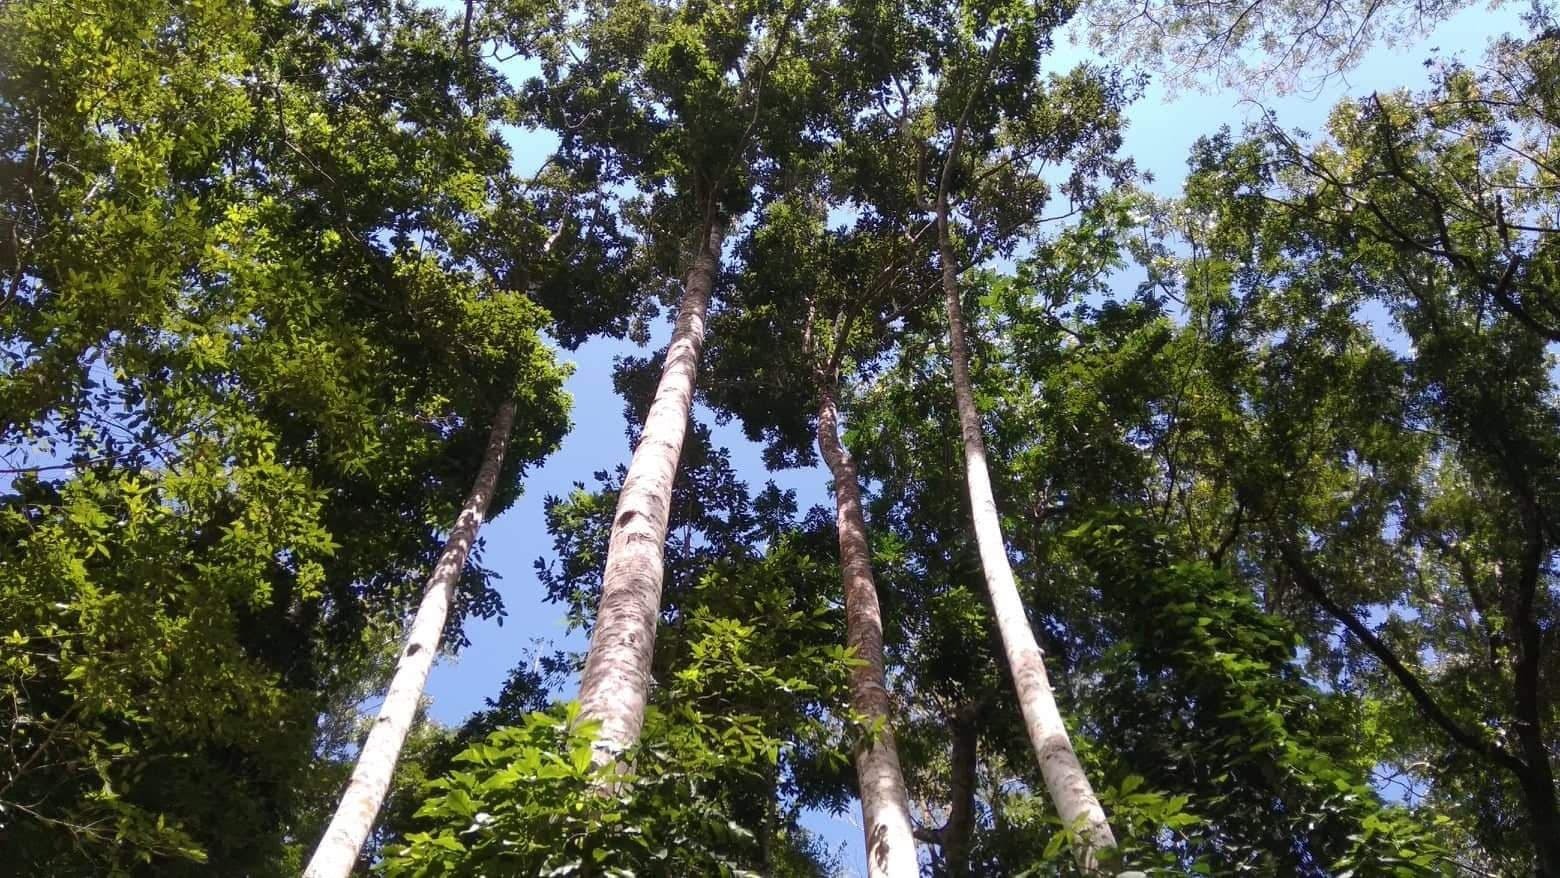 Philippine forest trees threatened by deforestation and climate change | Edward Webb